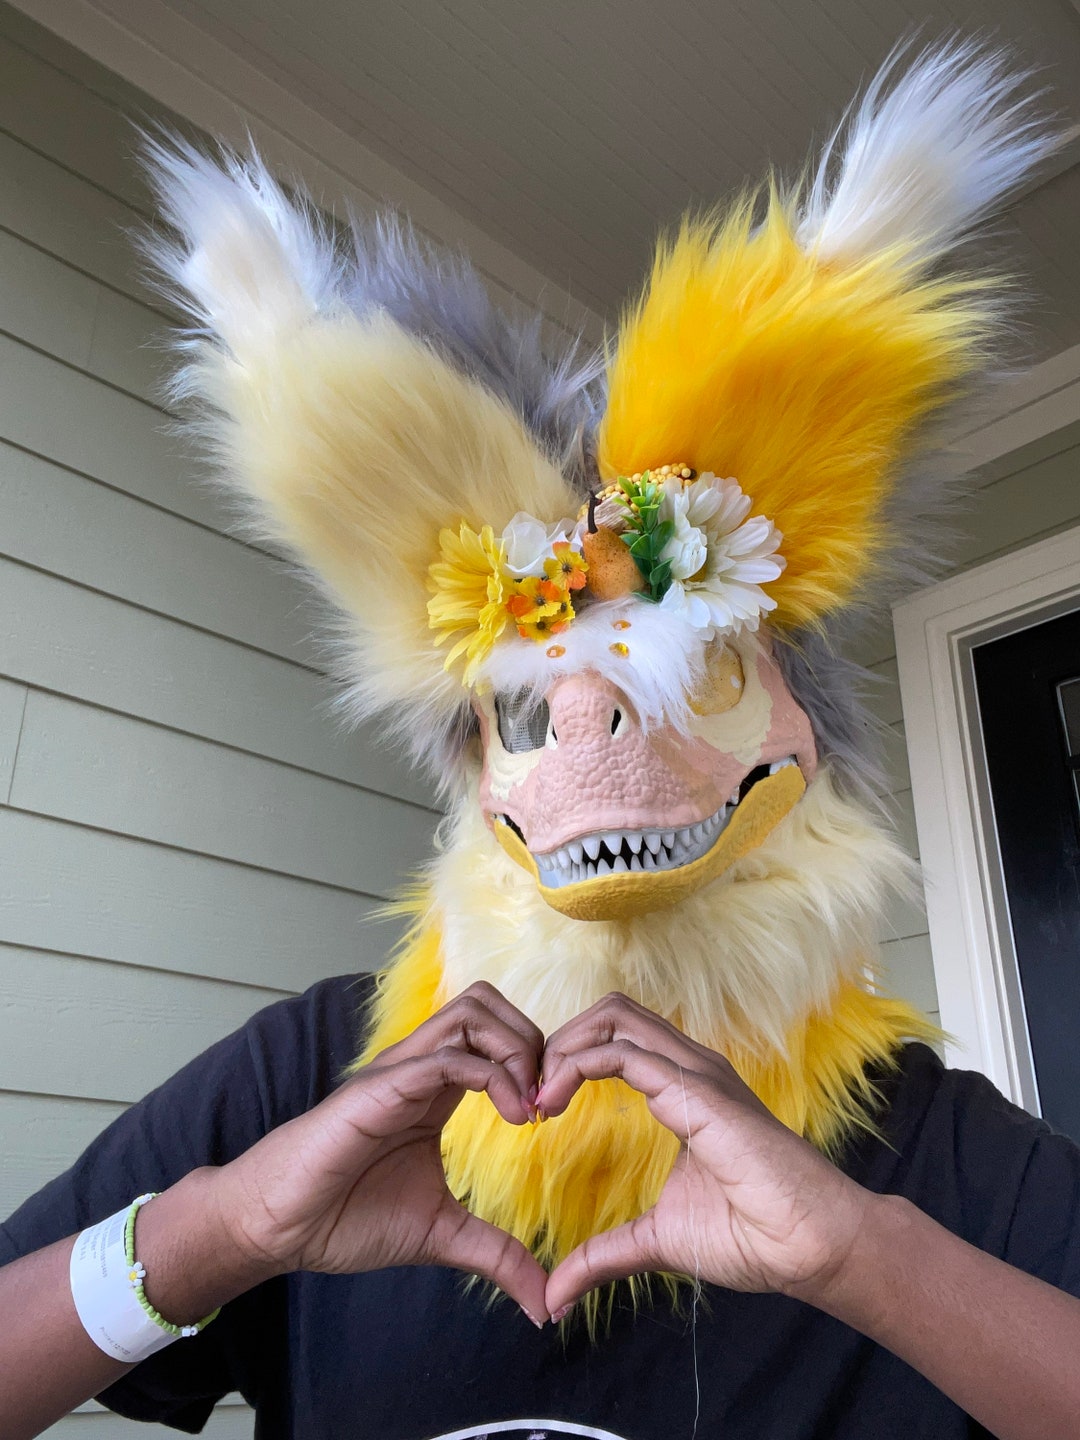 I tried fully furring a Dino mask into a fursuit head 😬 [The